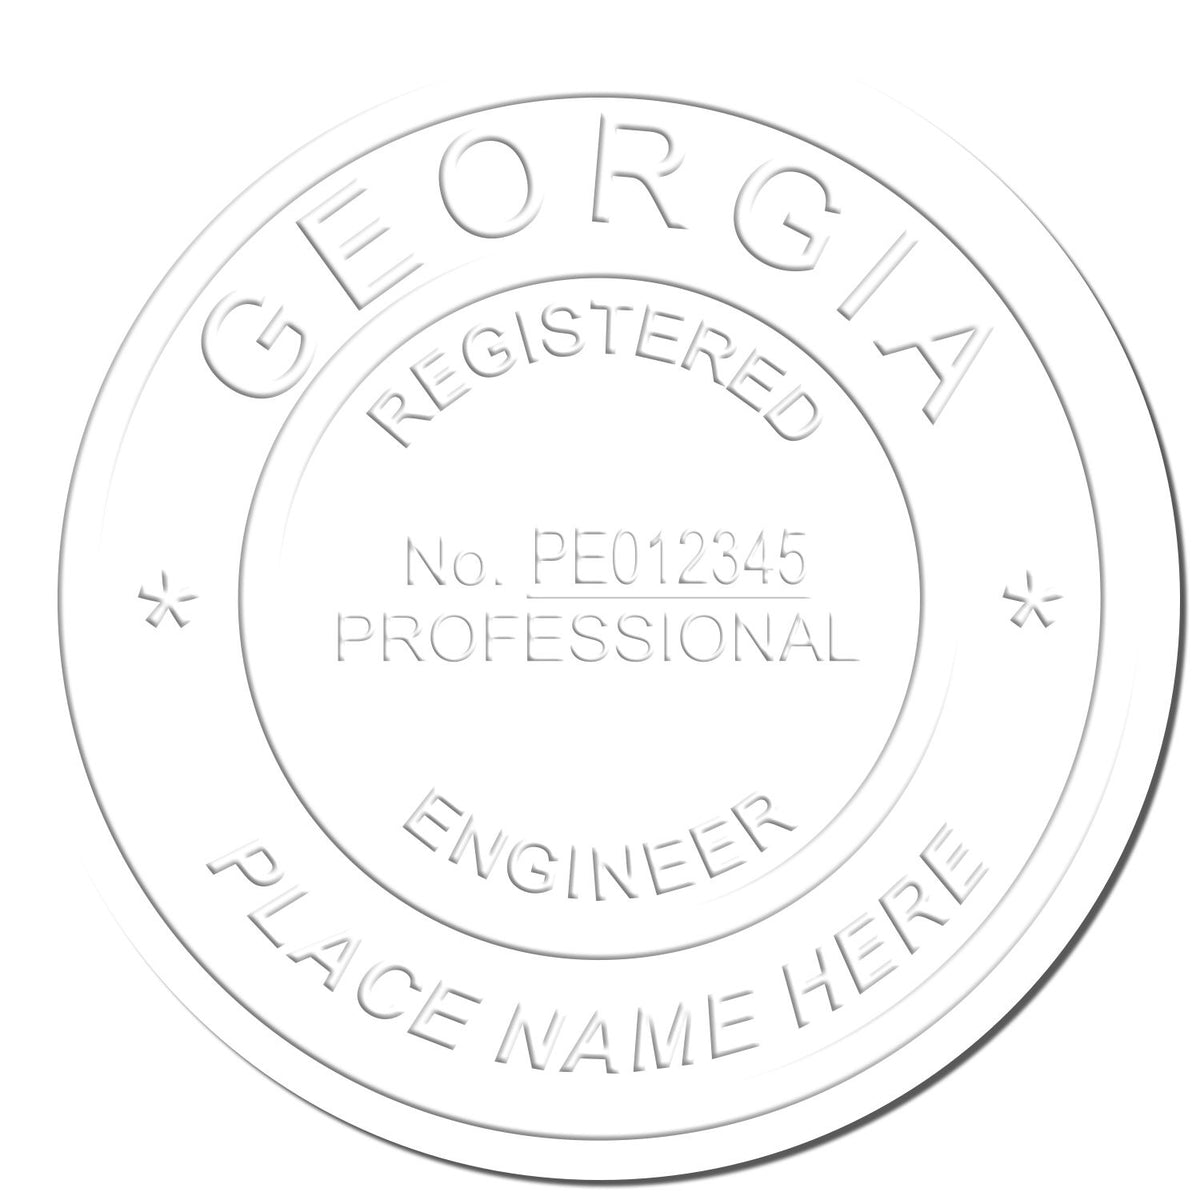 This paper is stamped with a sample imprint of the Gift Georgia Engineer Seal, signifying its quality and reliability.